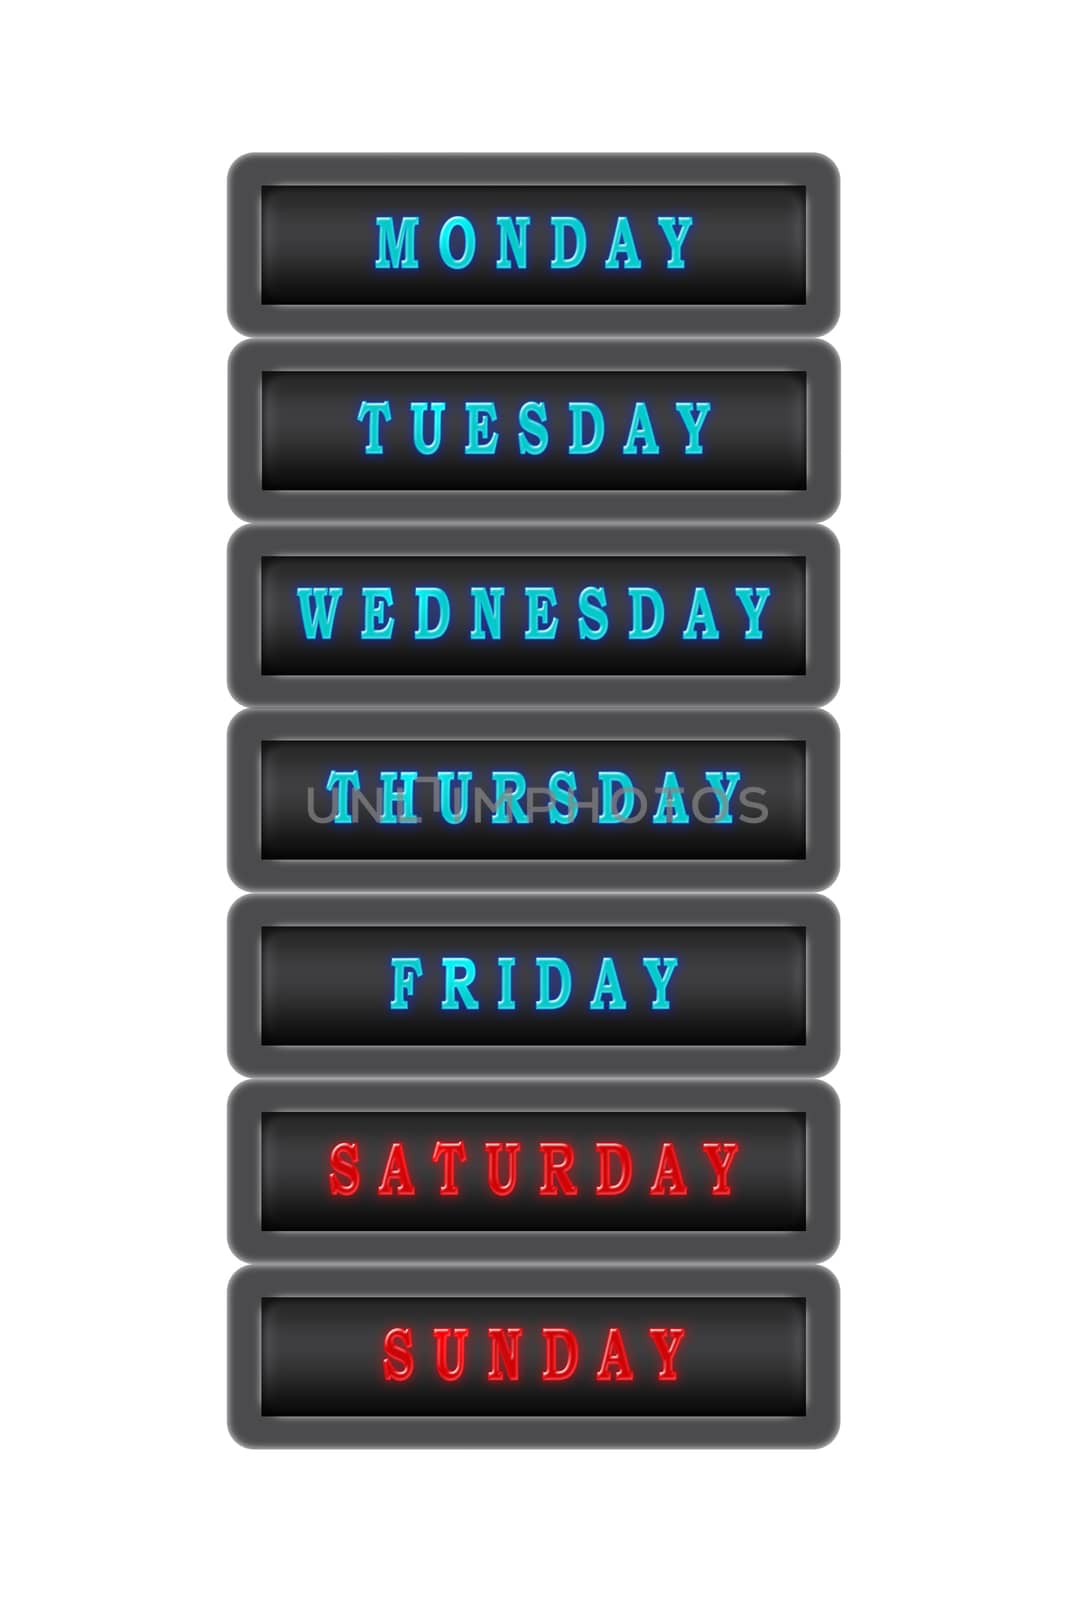 Among the list of days of the week, Saturday and Sunday are highlighted in red on a dark background.  The rest of the days are highlighted in blue on a dark background.